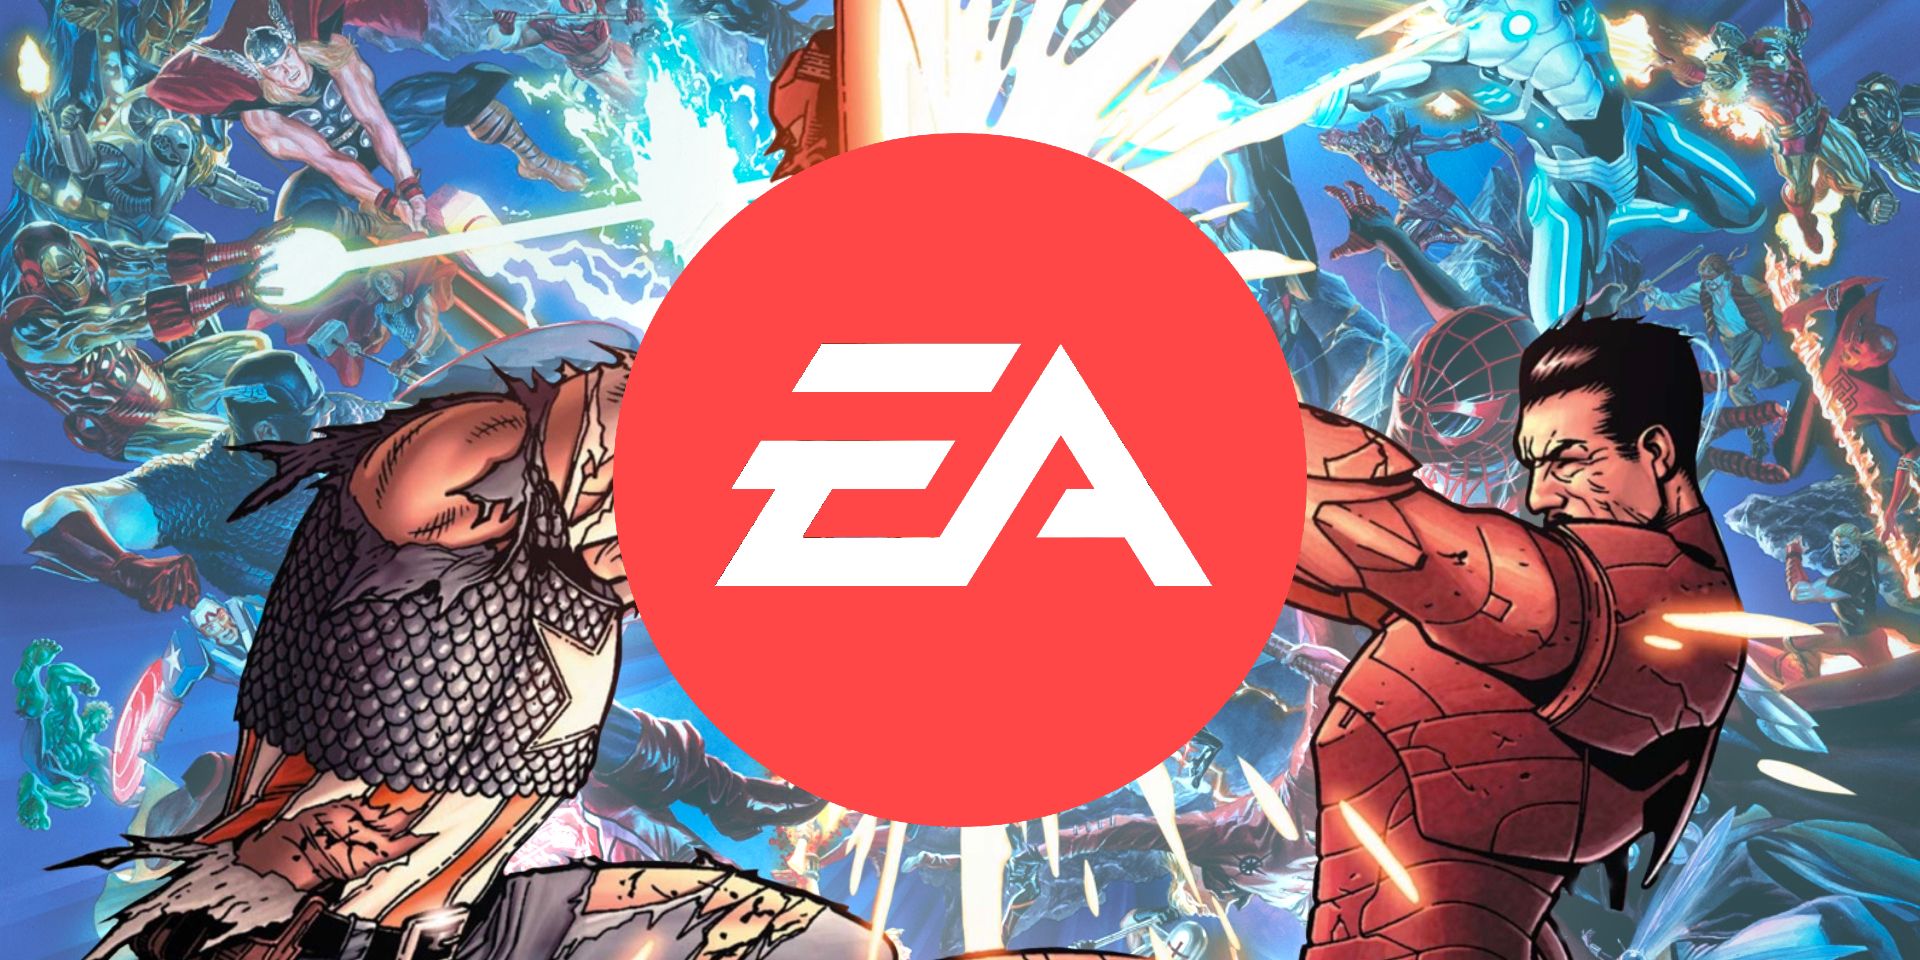 EA SPORTS™ and Marvel Entertainment Collaborate to Bring Iconic